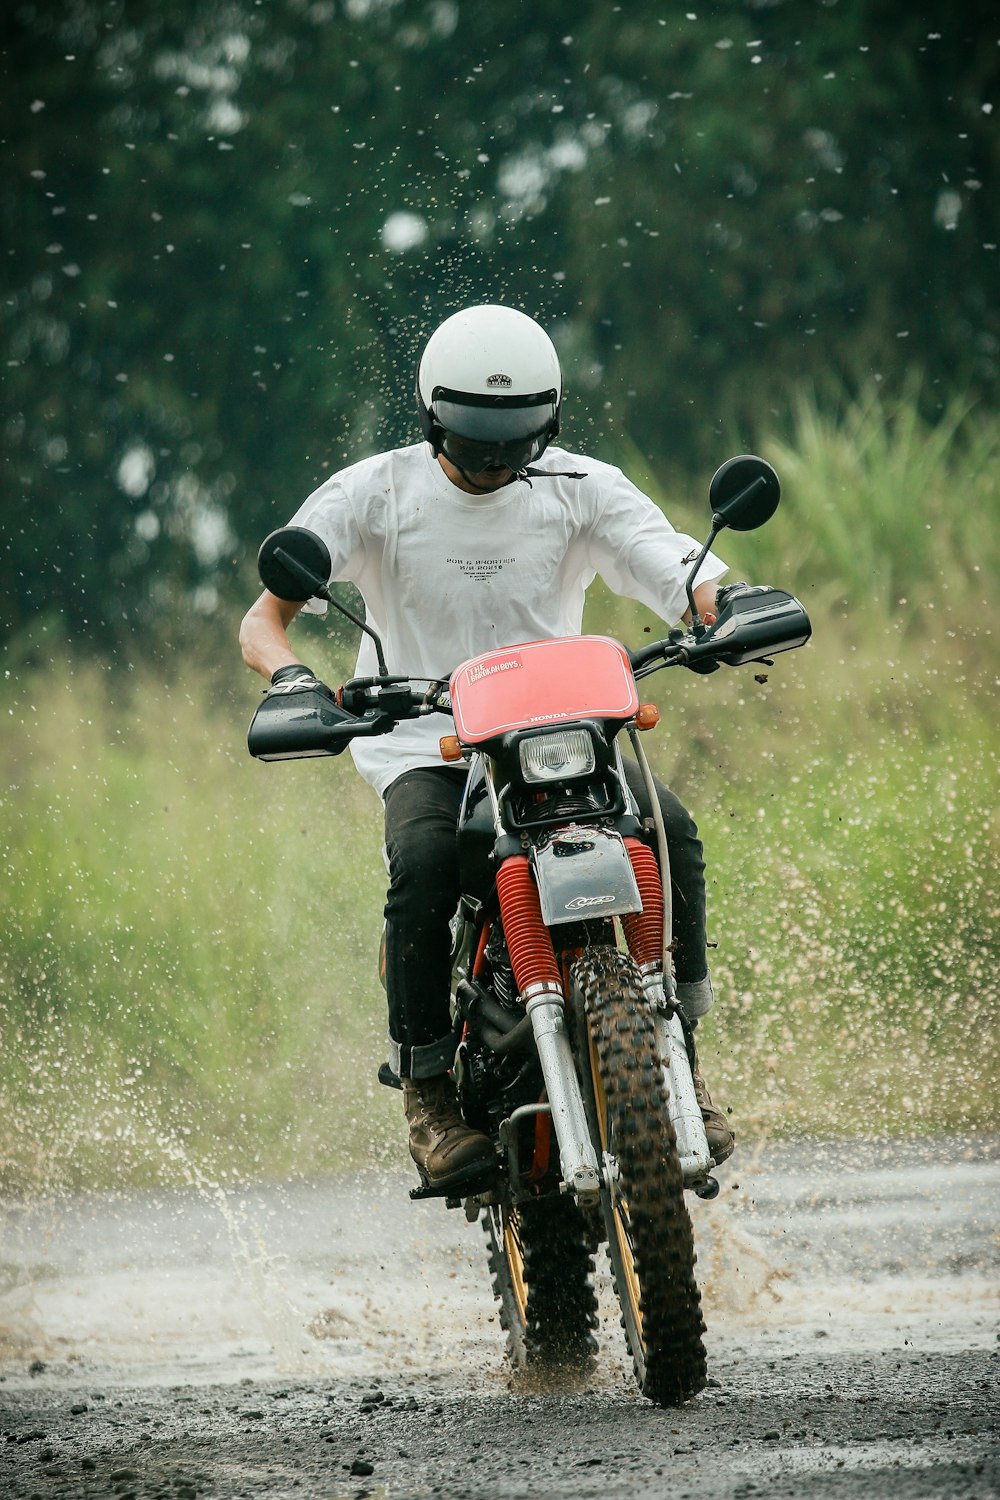 a man riding a motorcycle on a wet road